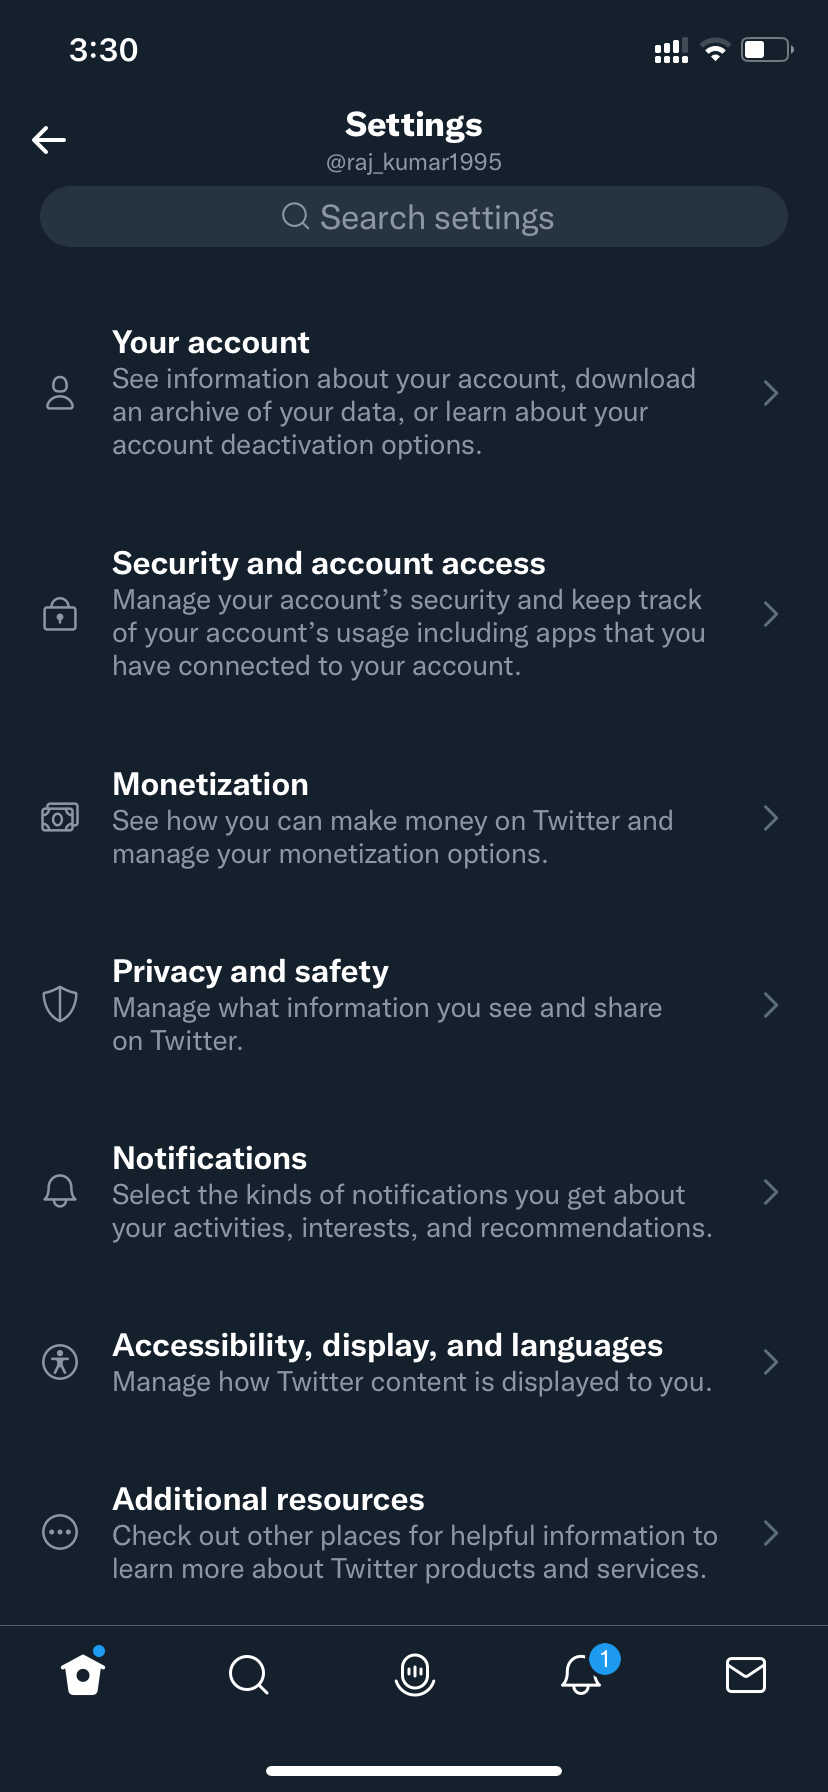 Twitter Security and account access